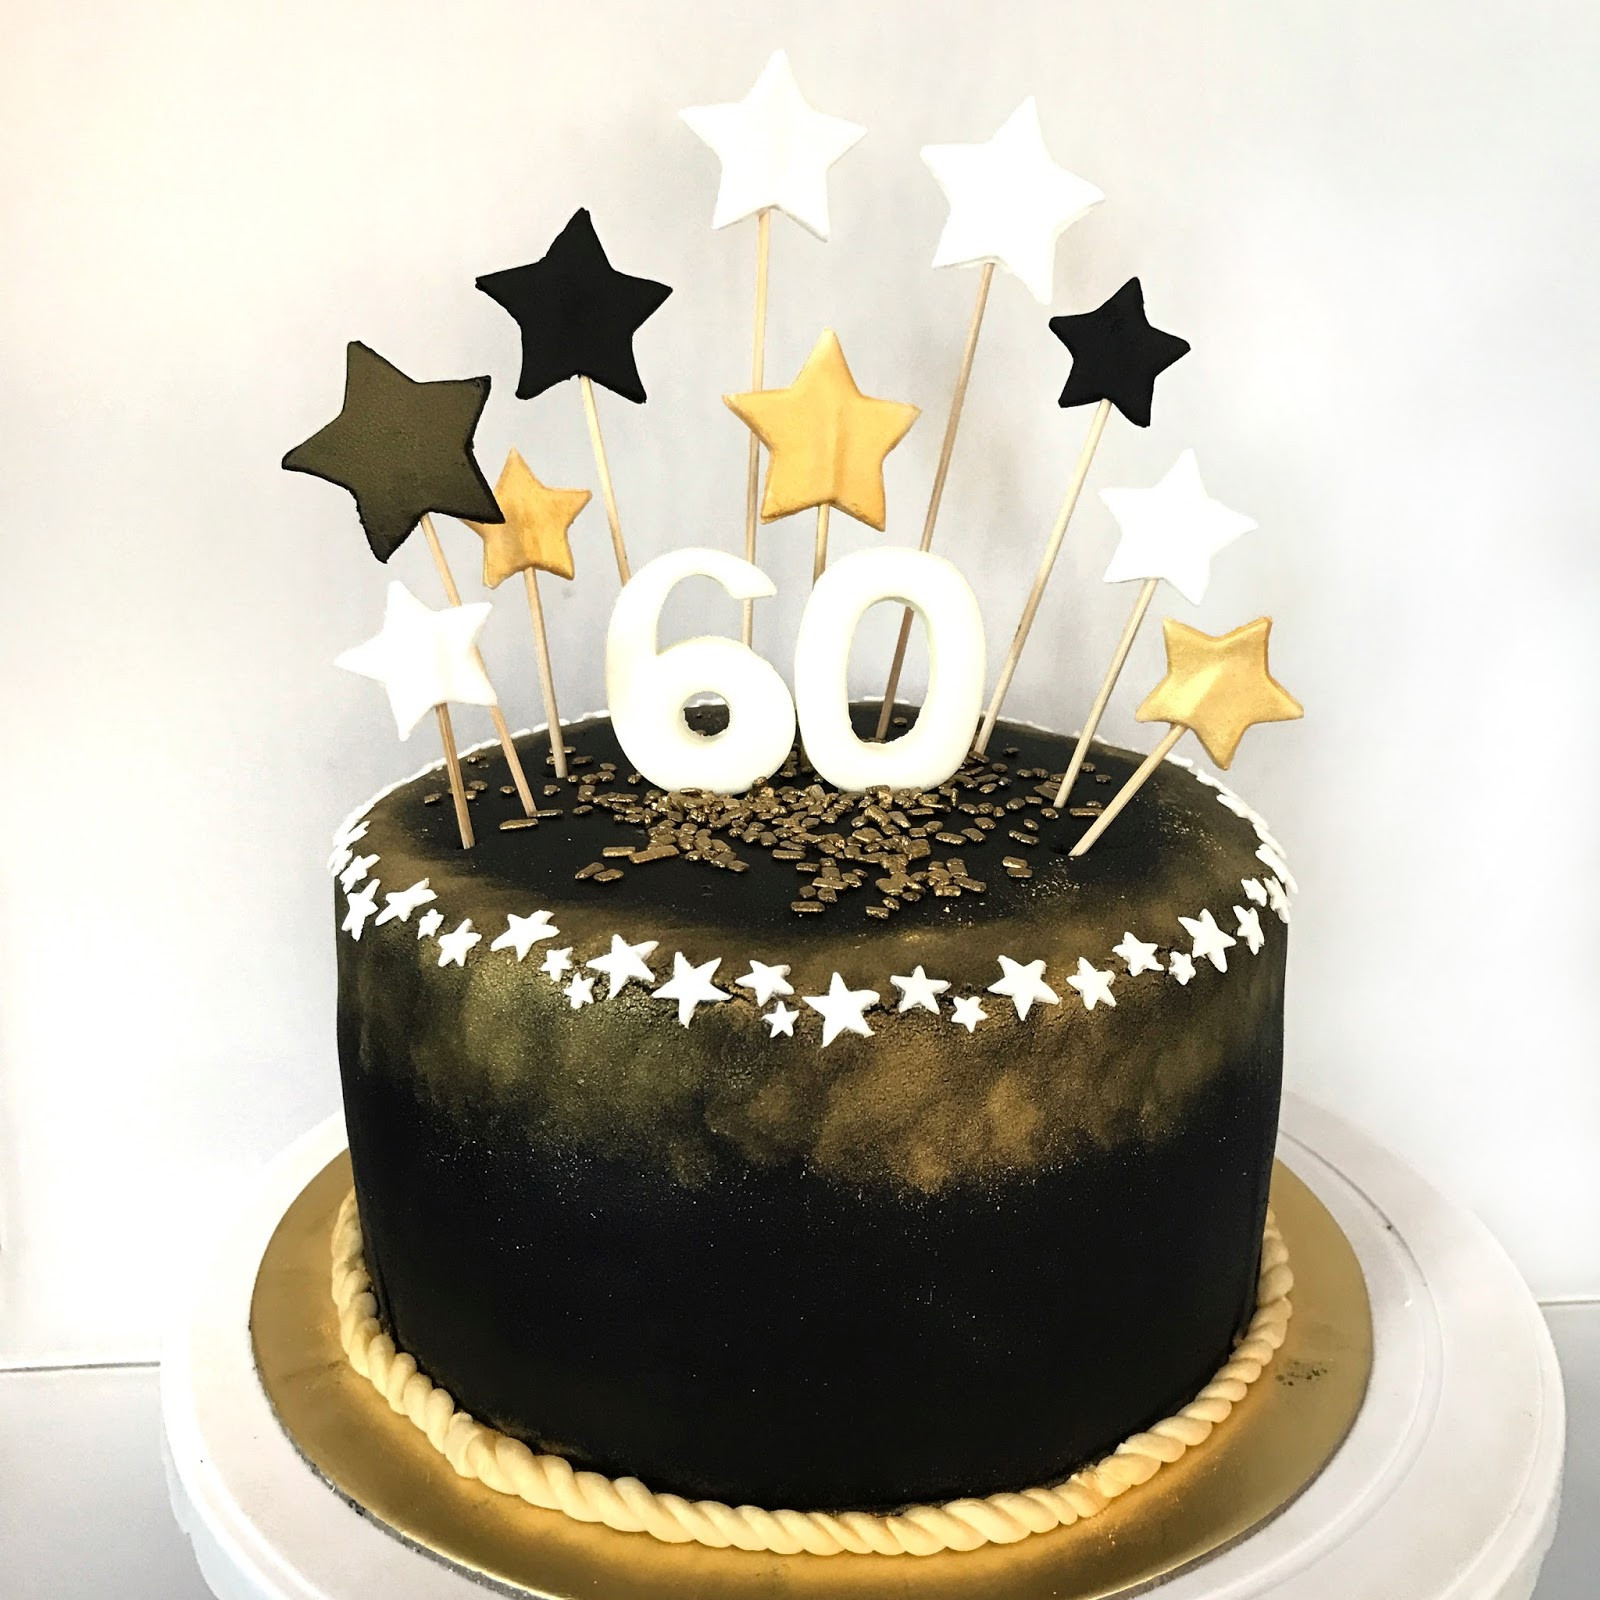 60th Birthday Cakes
 Black and Gold 60th Birthday Cake Sherbakes